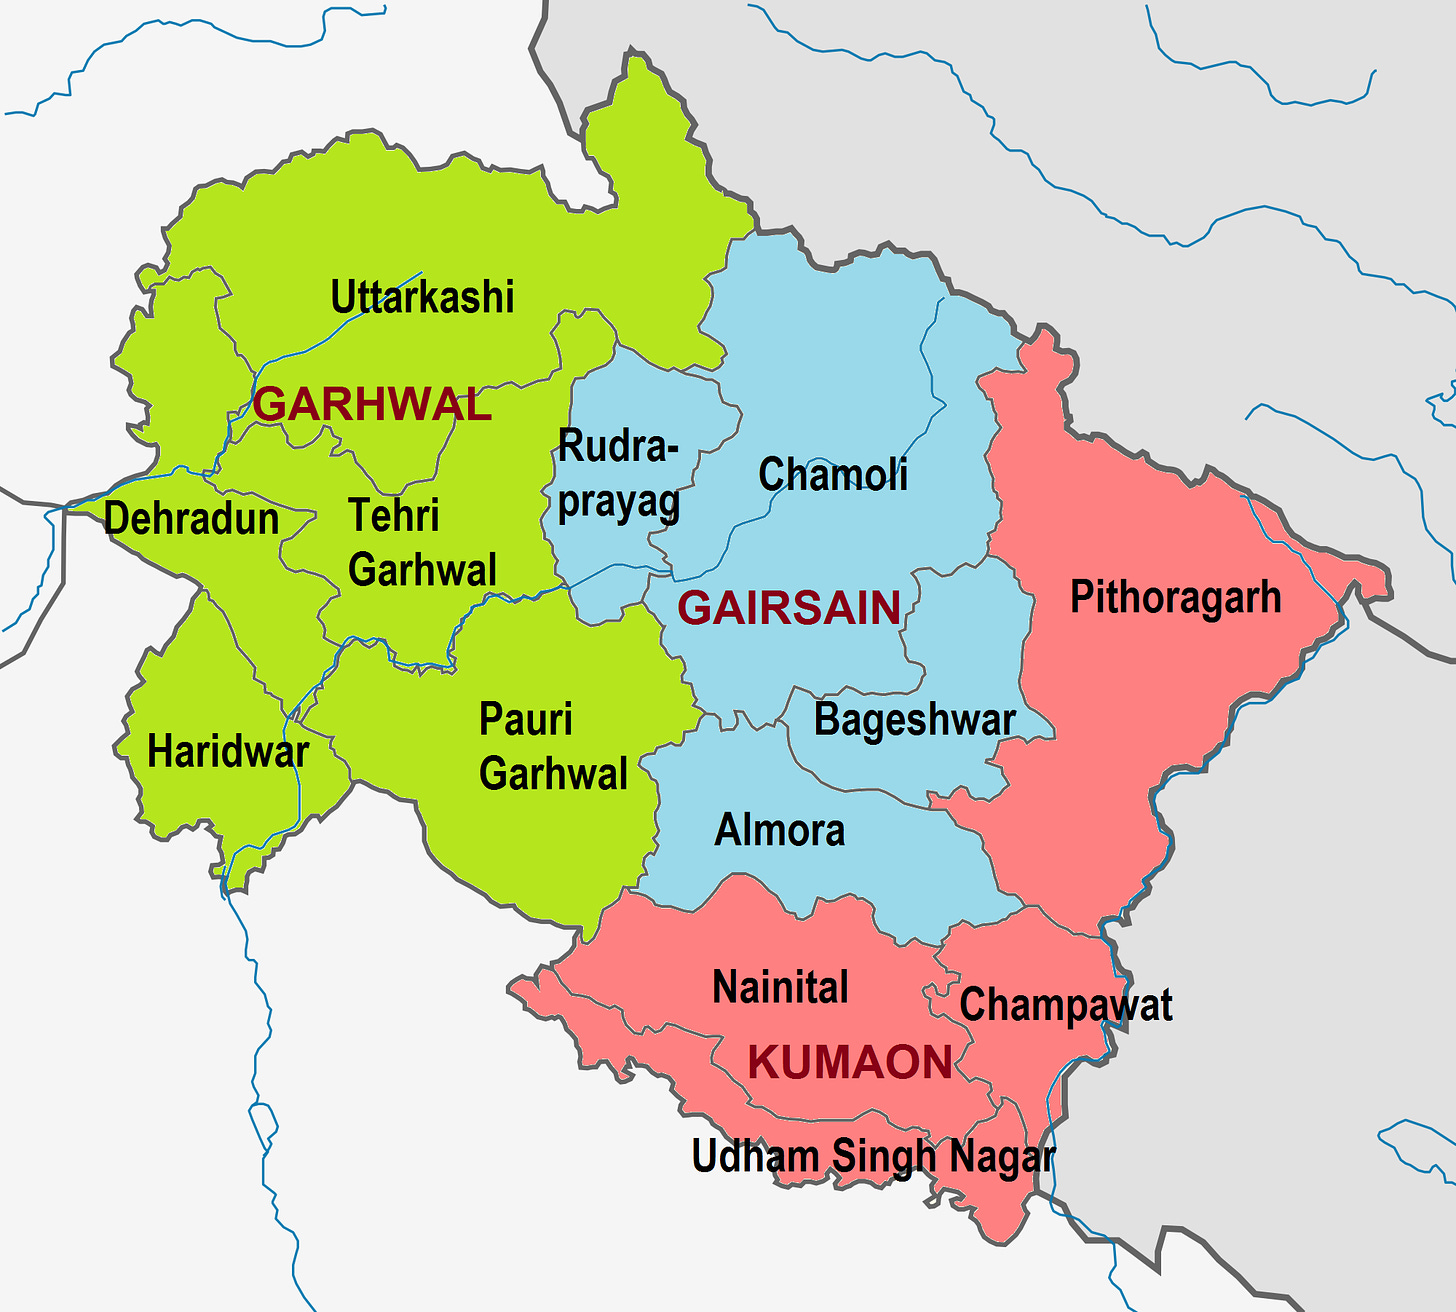 File:Uttarakhand Divisions Map.png - Wikipedia